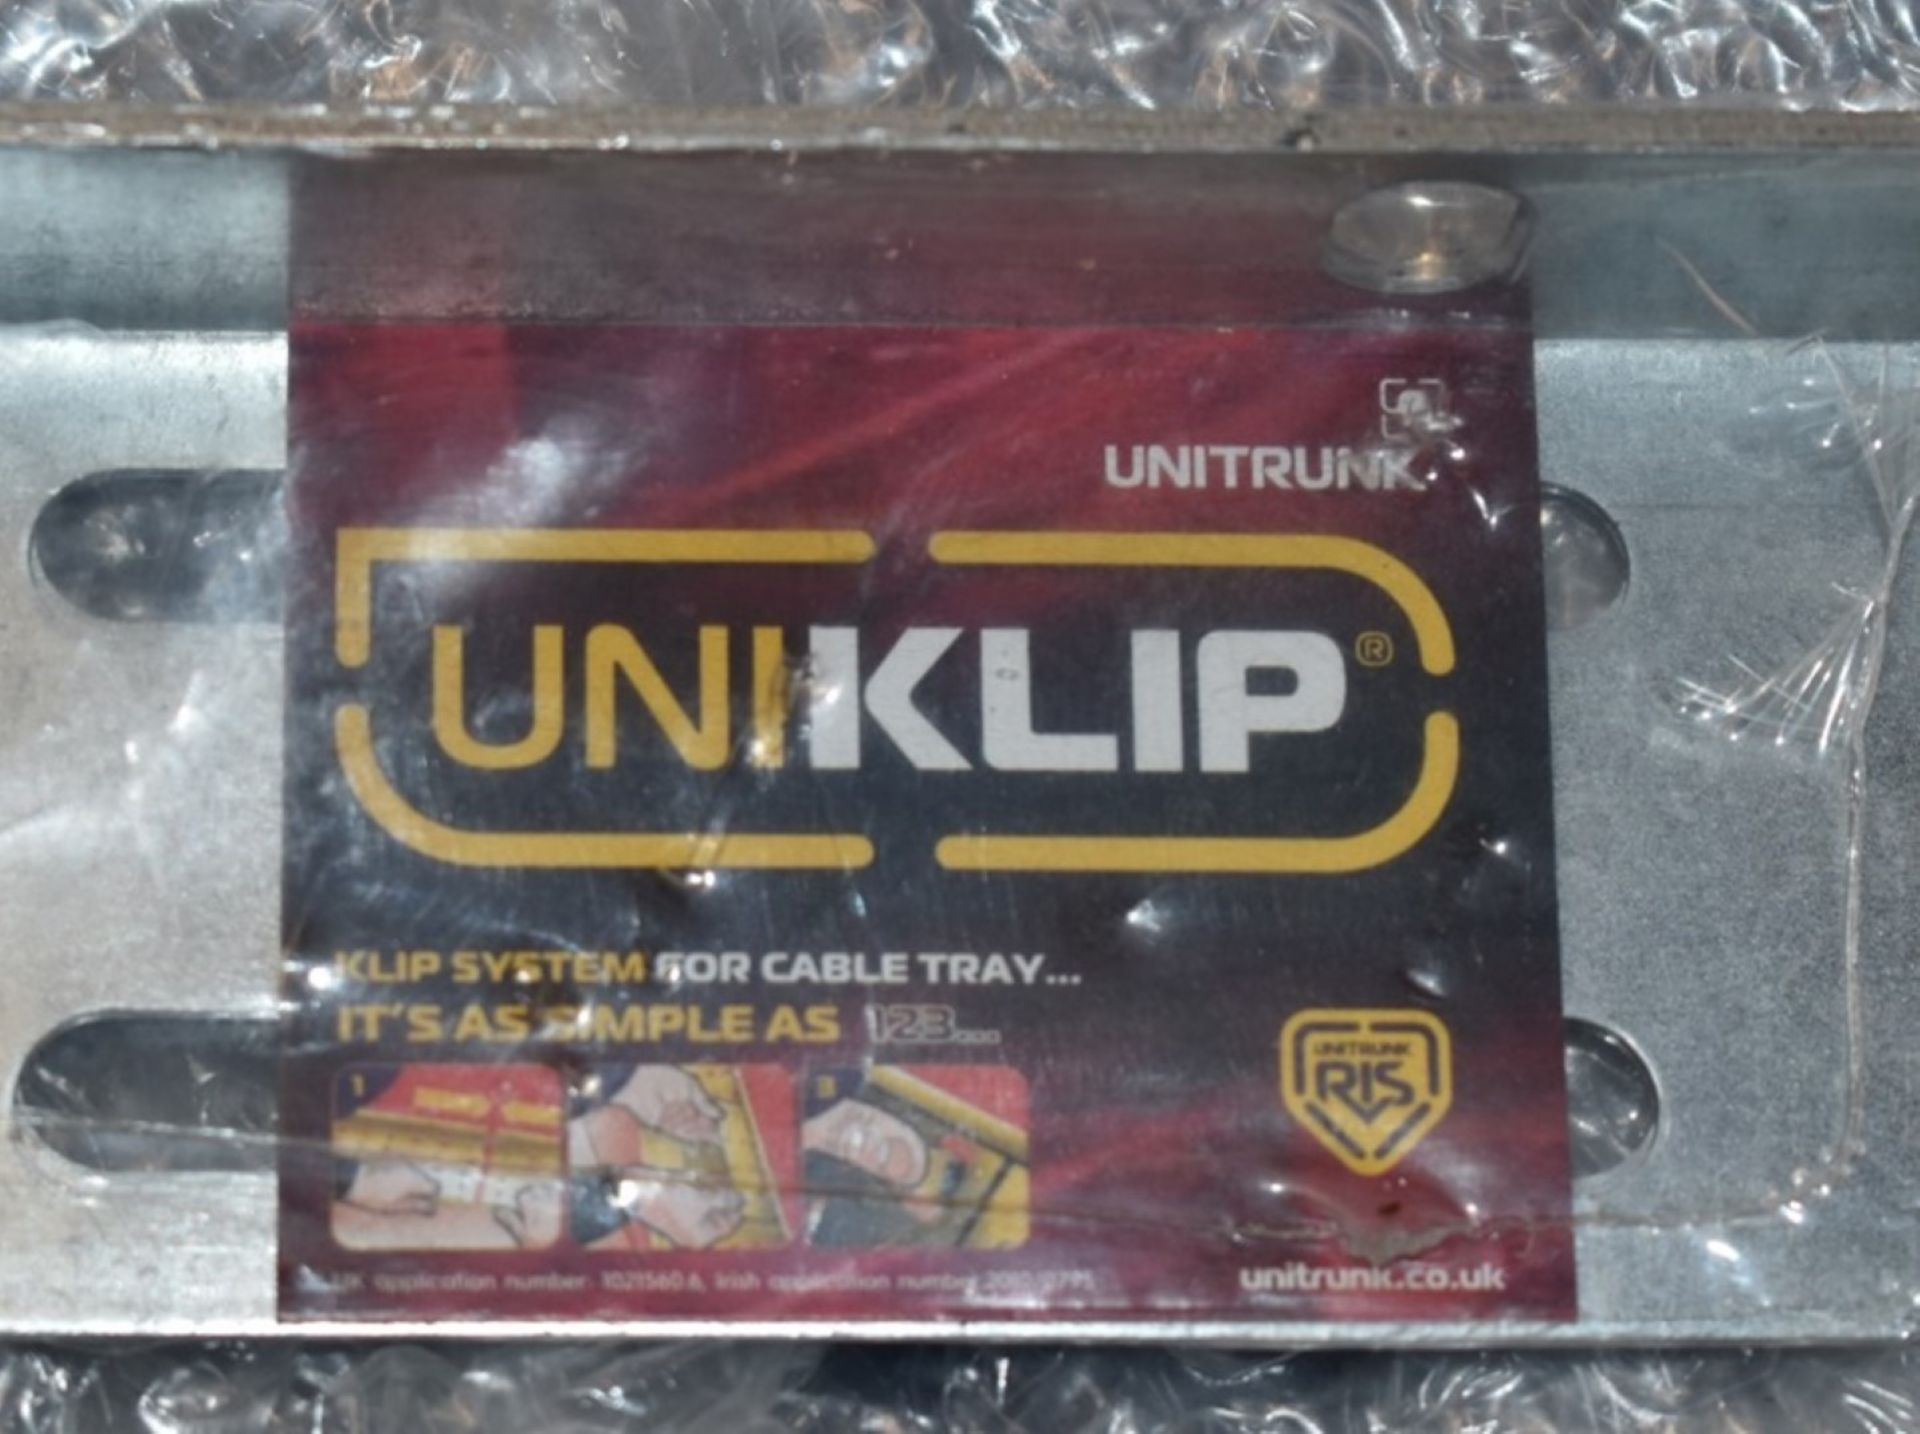 60 x Sets of Unitrunk Uniklip Straight Couplers For Cable Trays Brand New Stock - Image 3 of 5